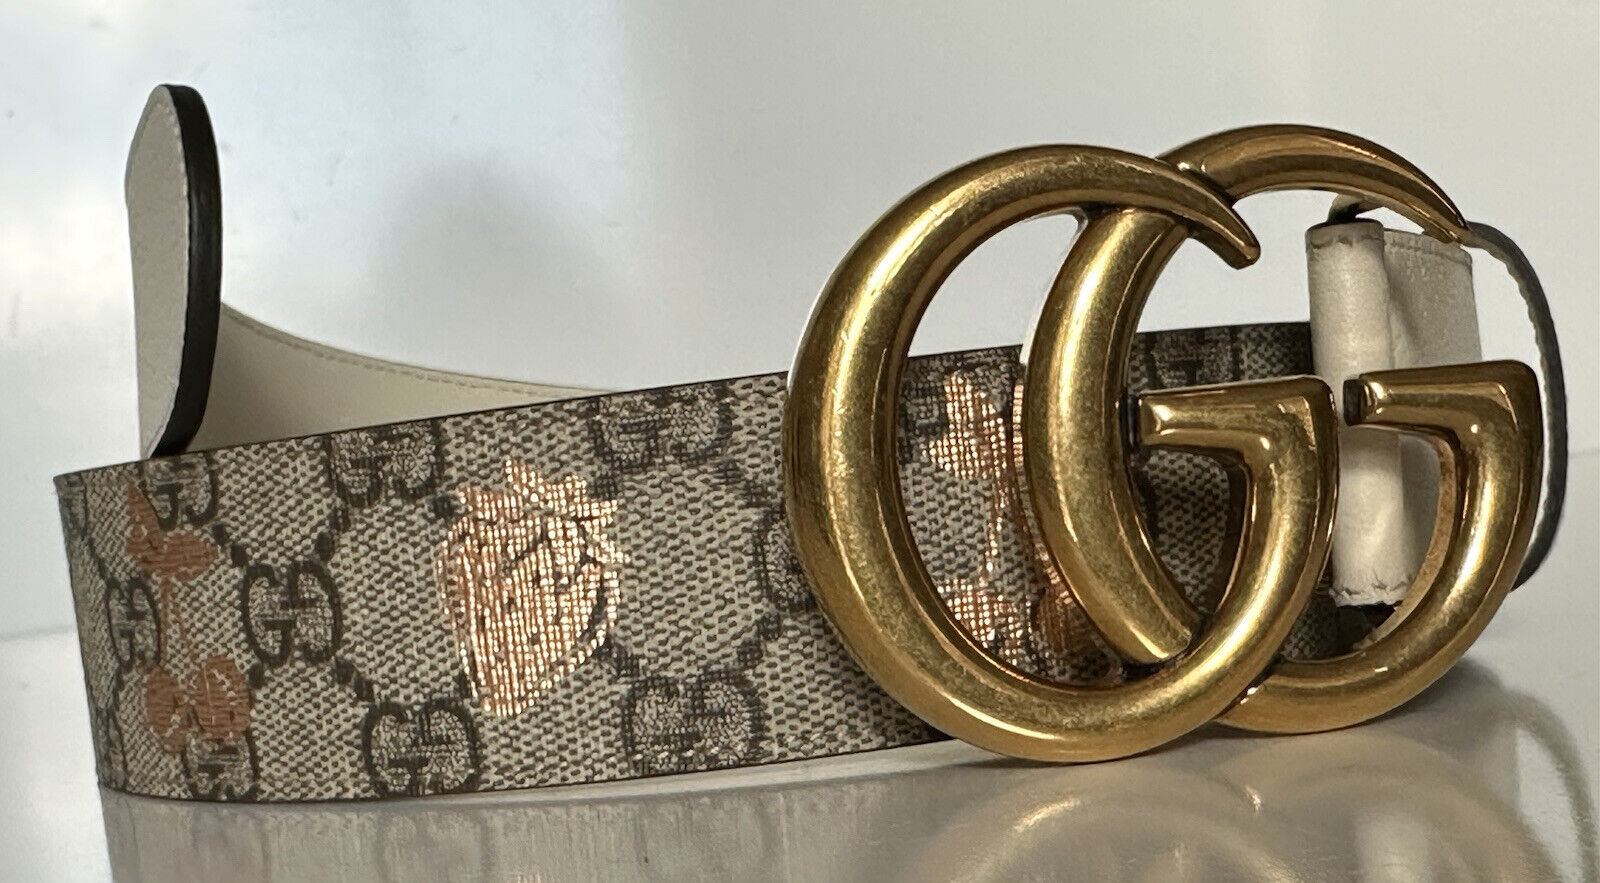 NWT Gucci Women's GG Marmont Leather Belt Brown 90/36 Italy 400593